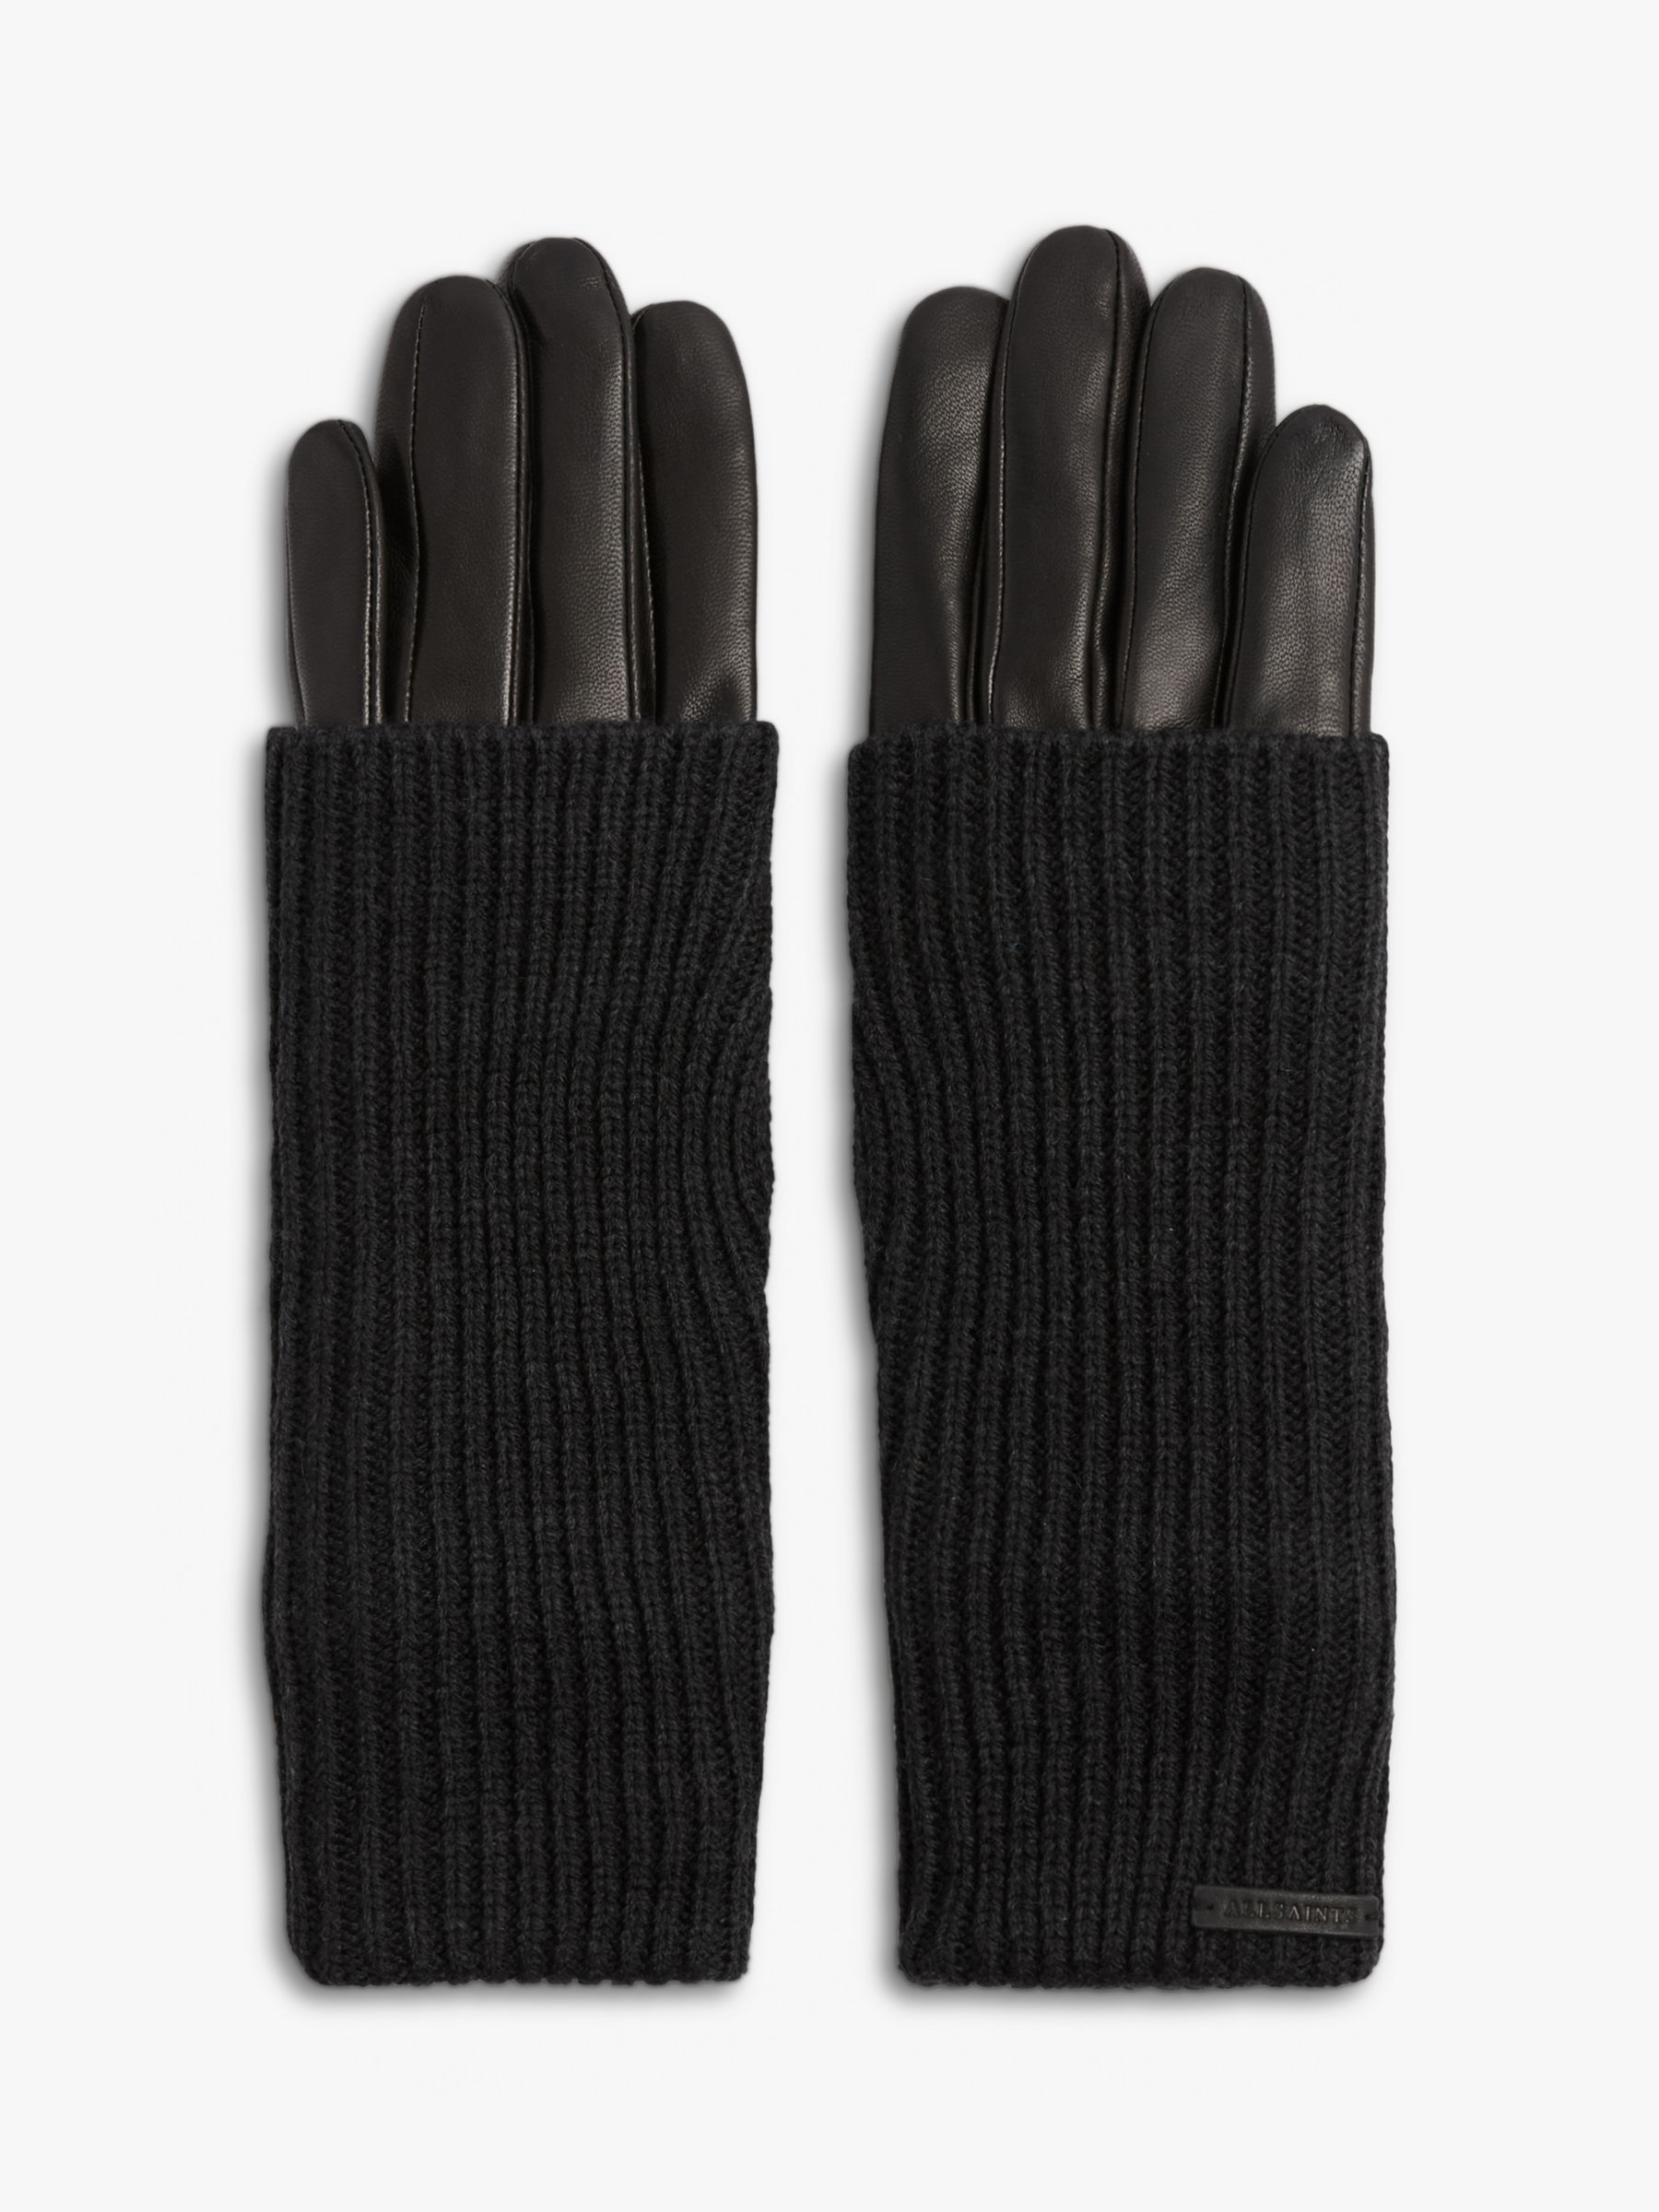 AllSaints Knit Cuff Leather Gloves, Black at John Lewis & Partners